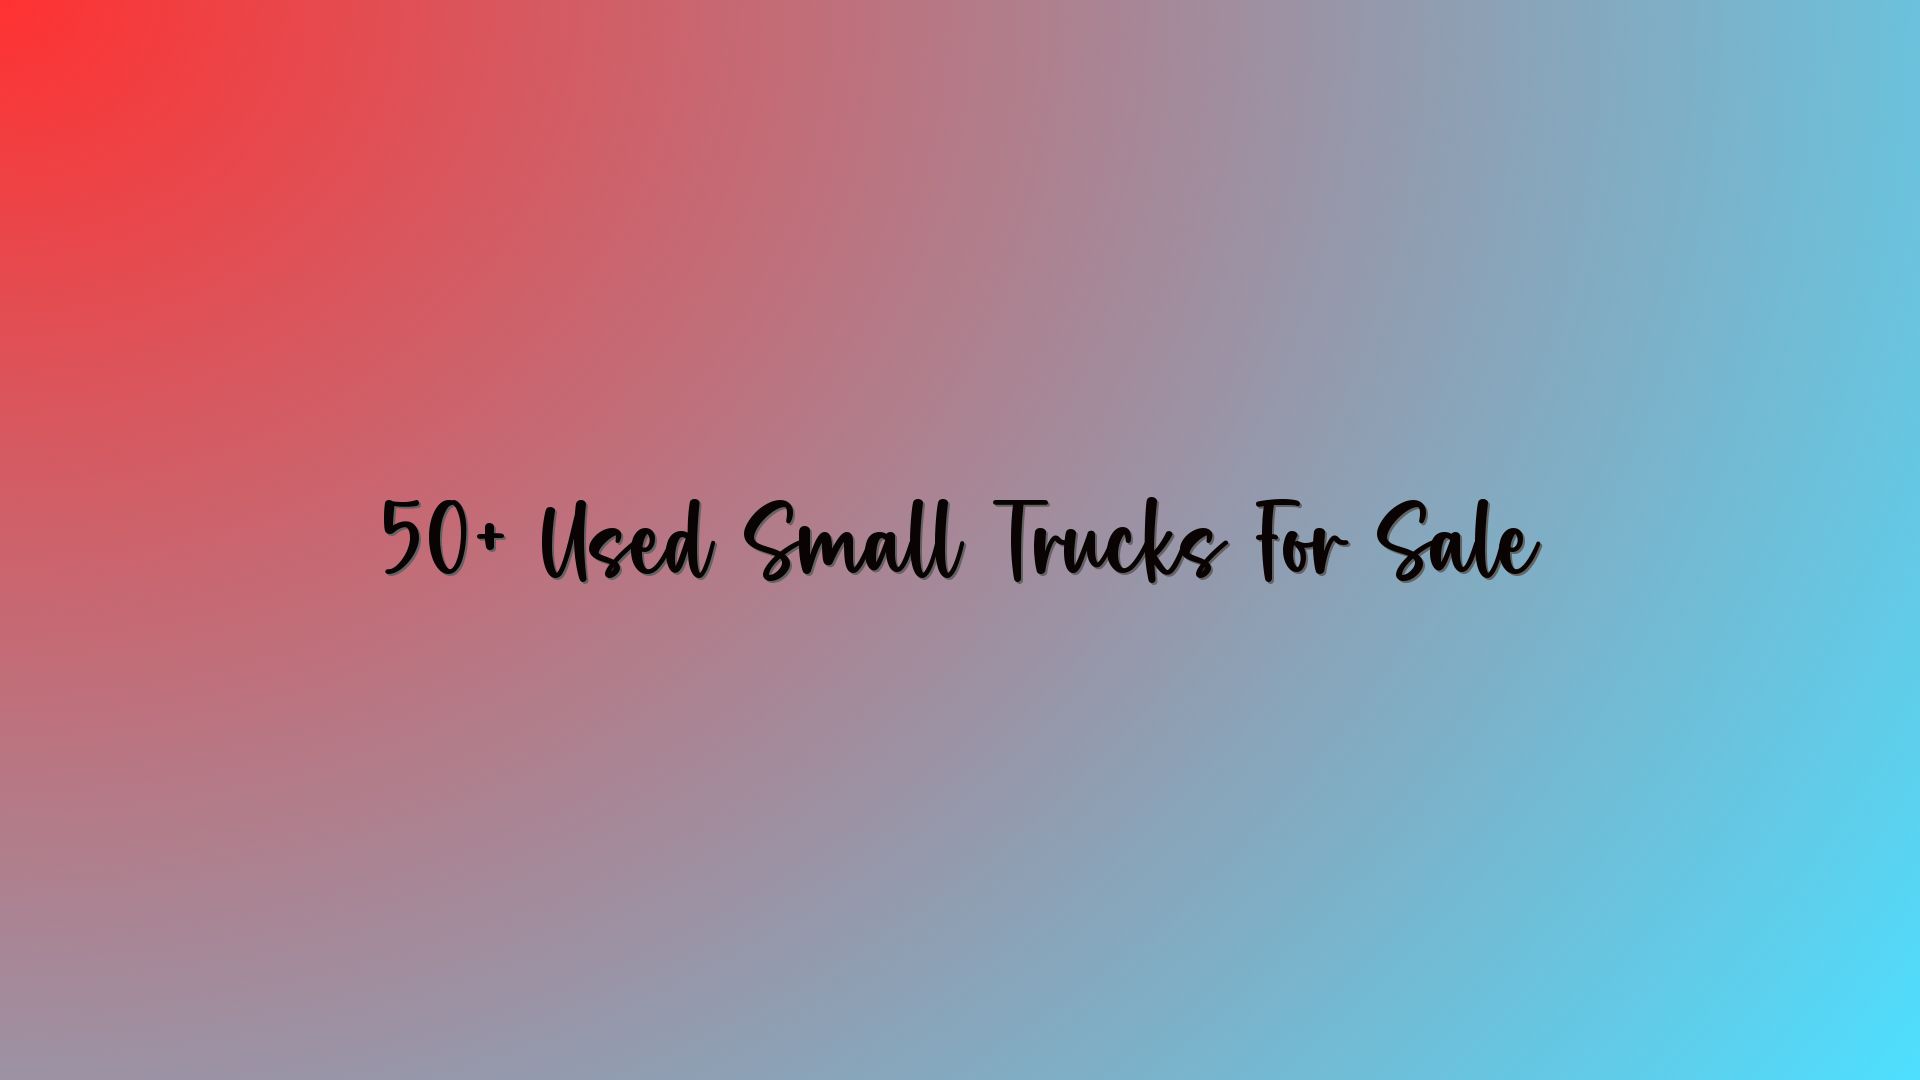 50+ Used Small Trucks For Sale